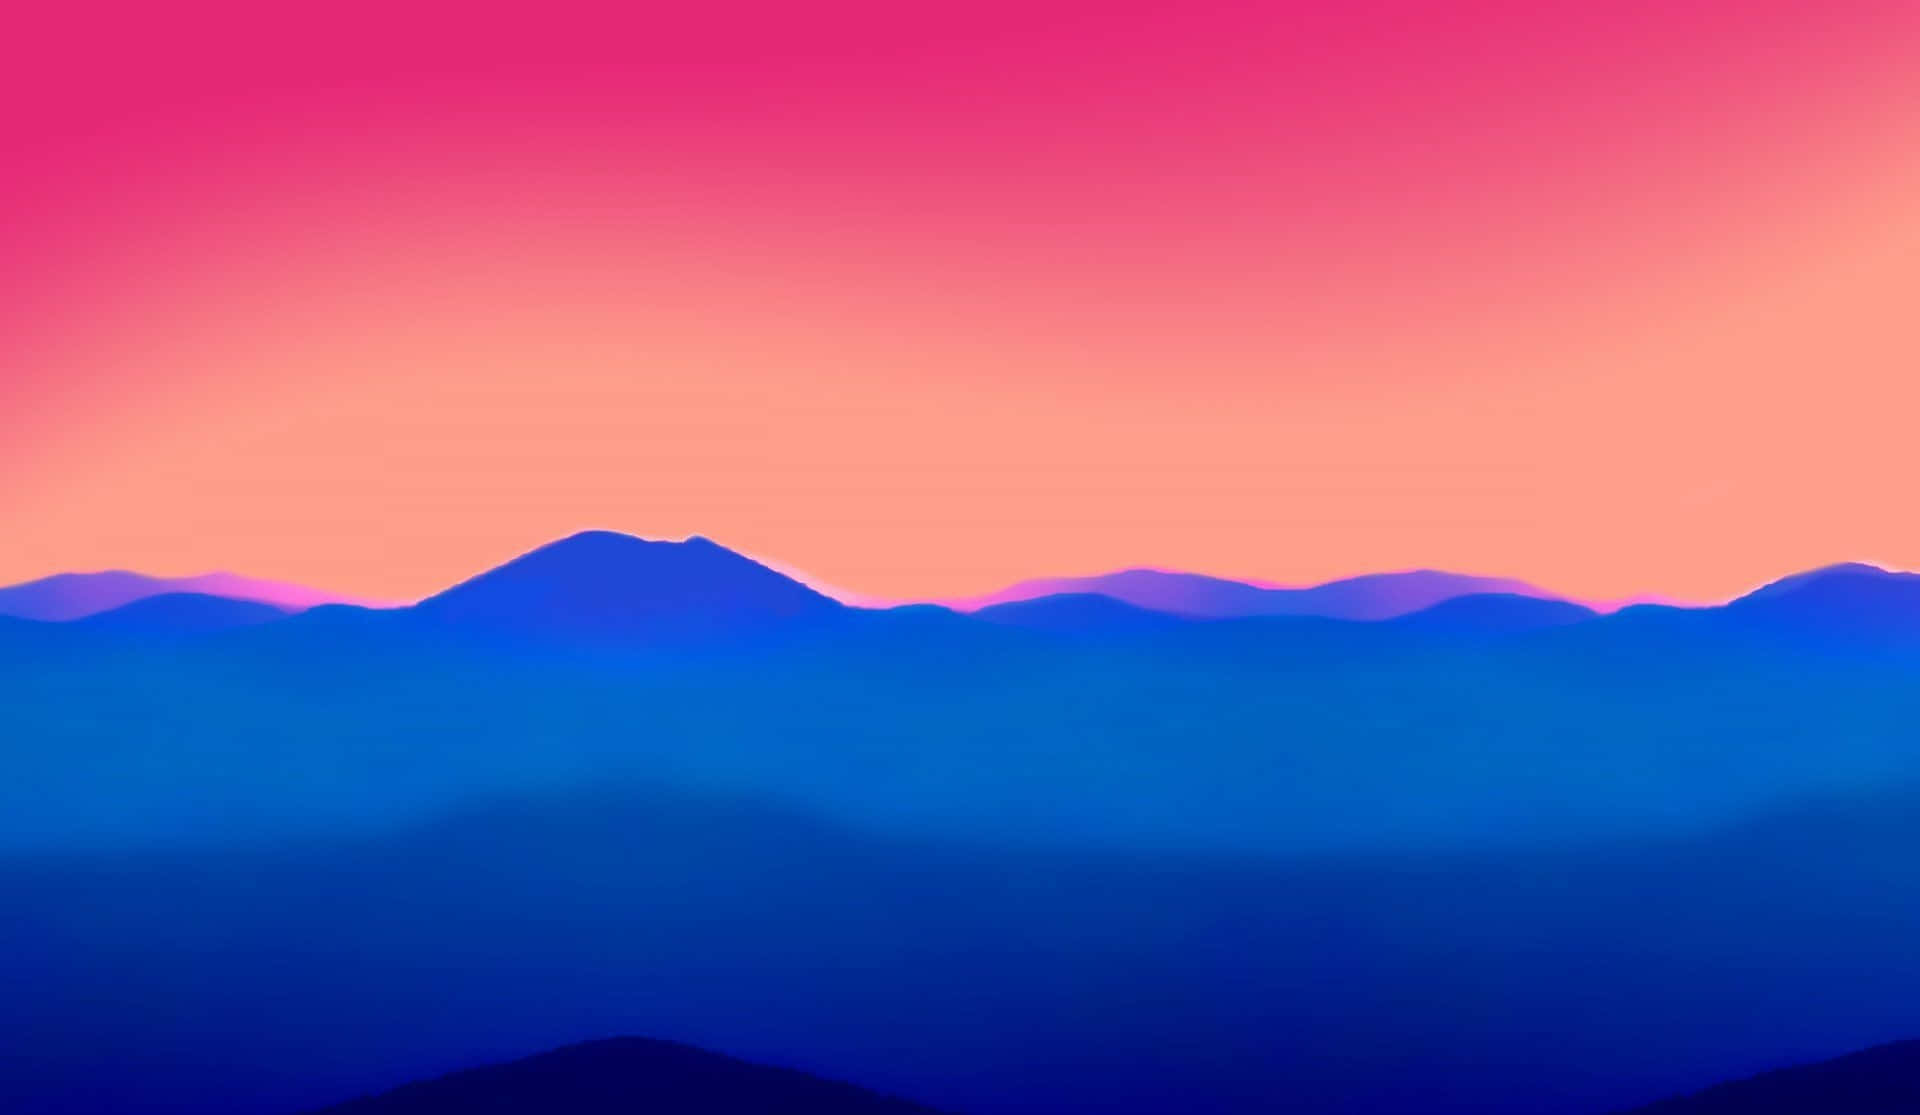 A Blue And Pink Sunset With Mountains In The Background Wallpaper